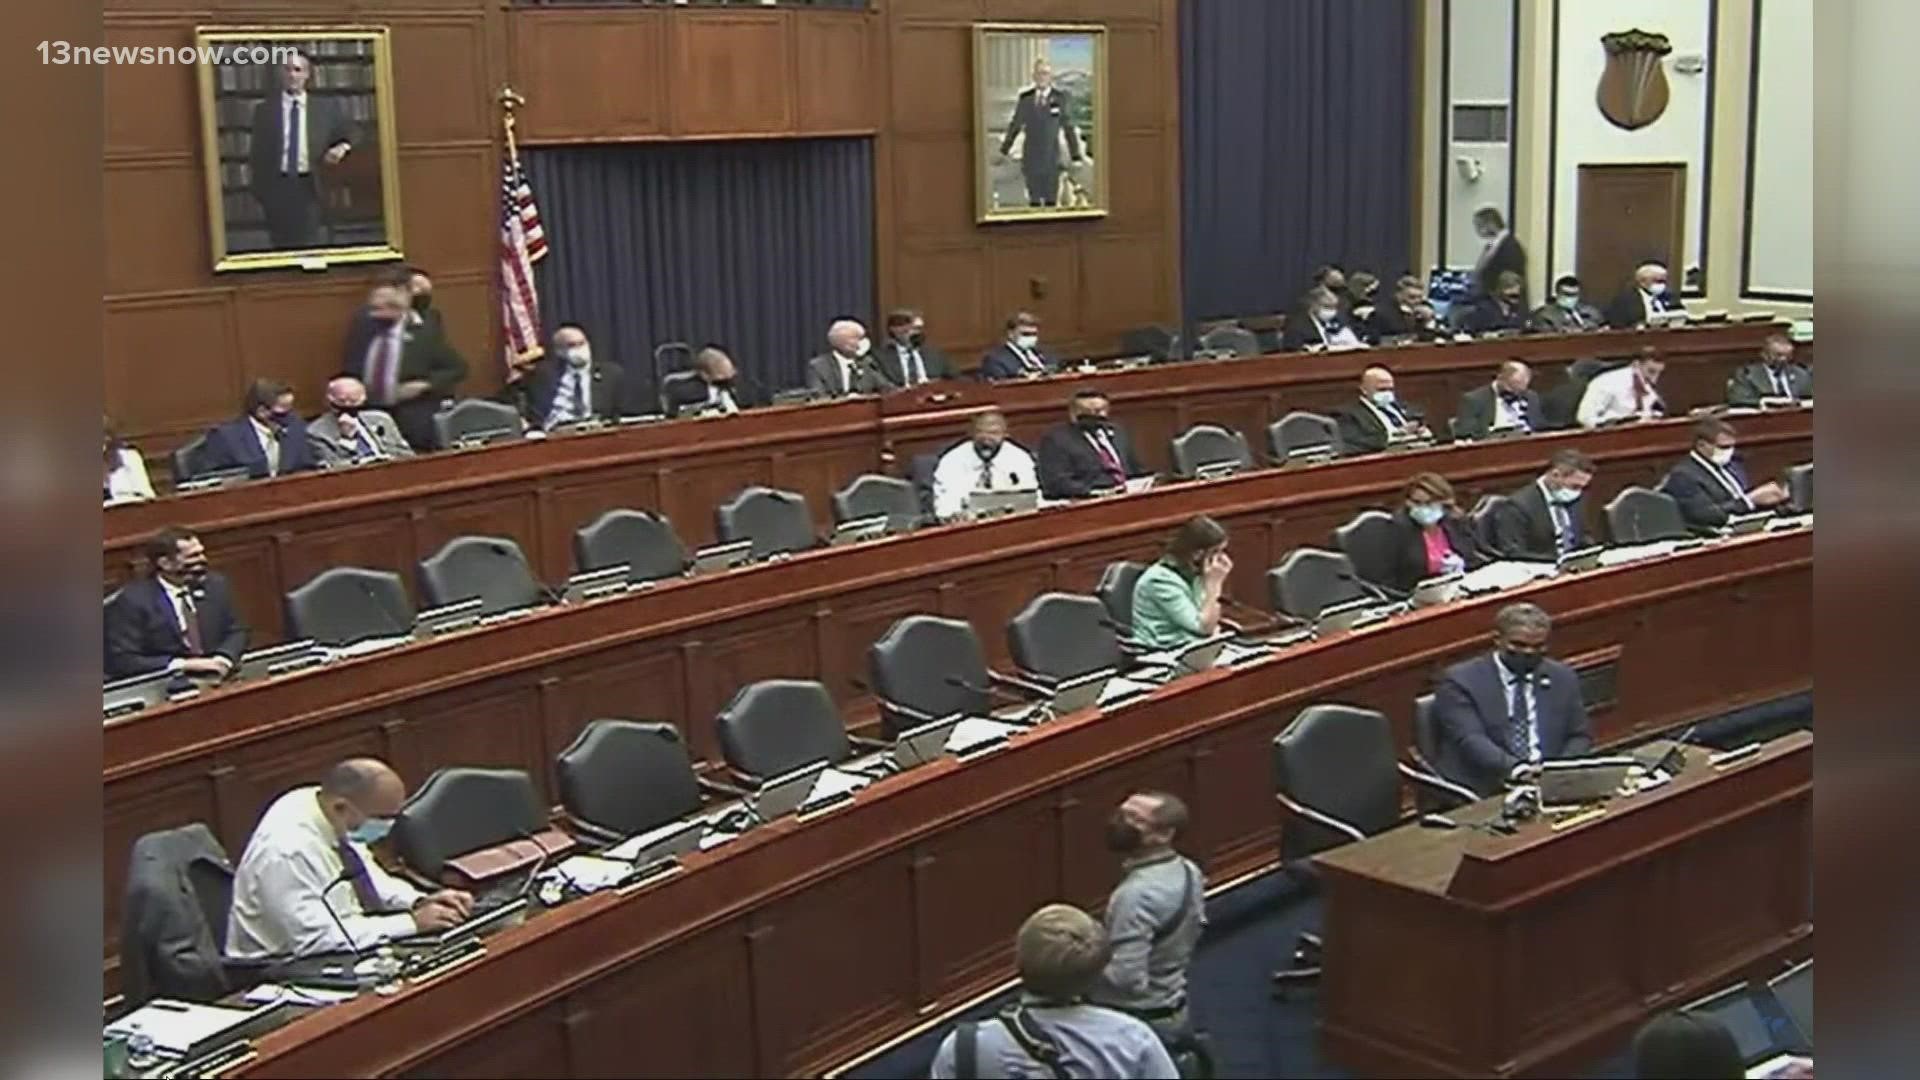 The NDAA is now on its way to the full house for a vote.